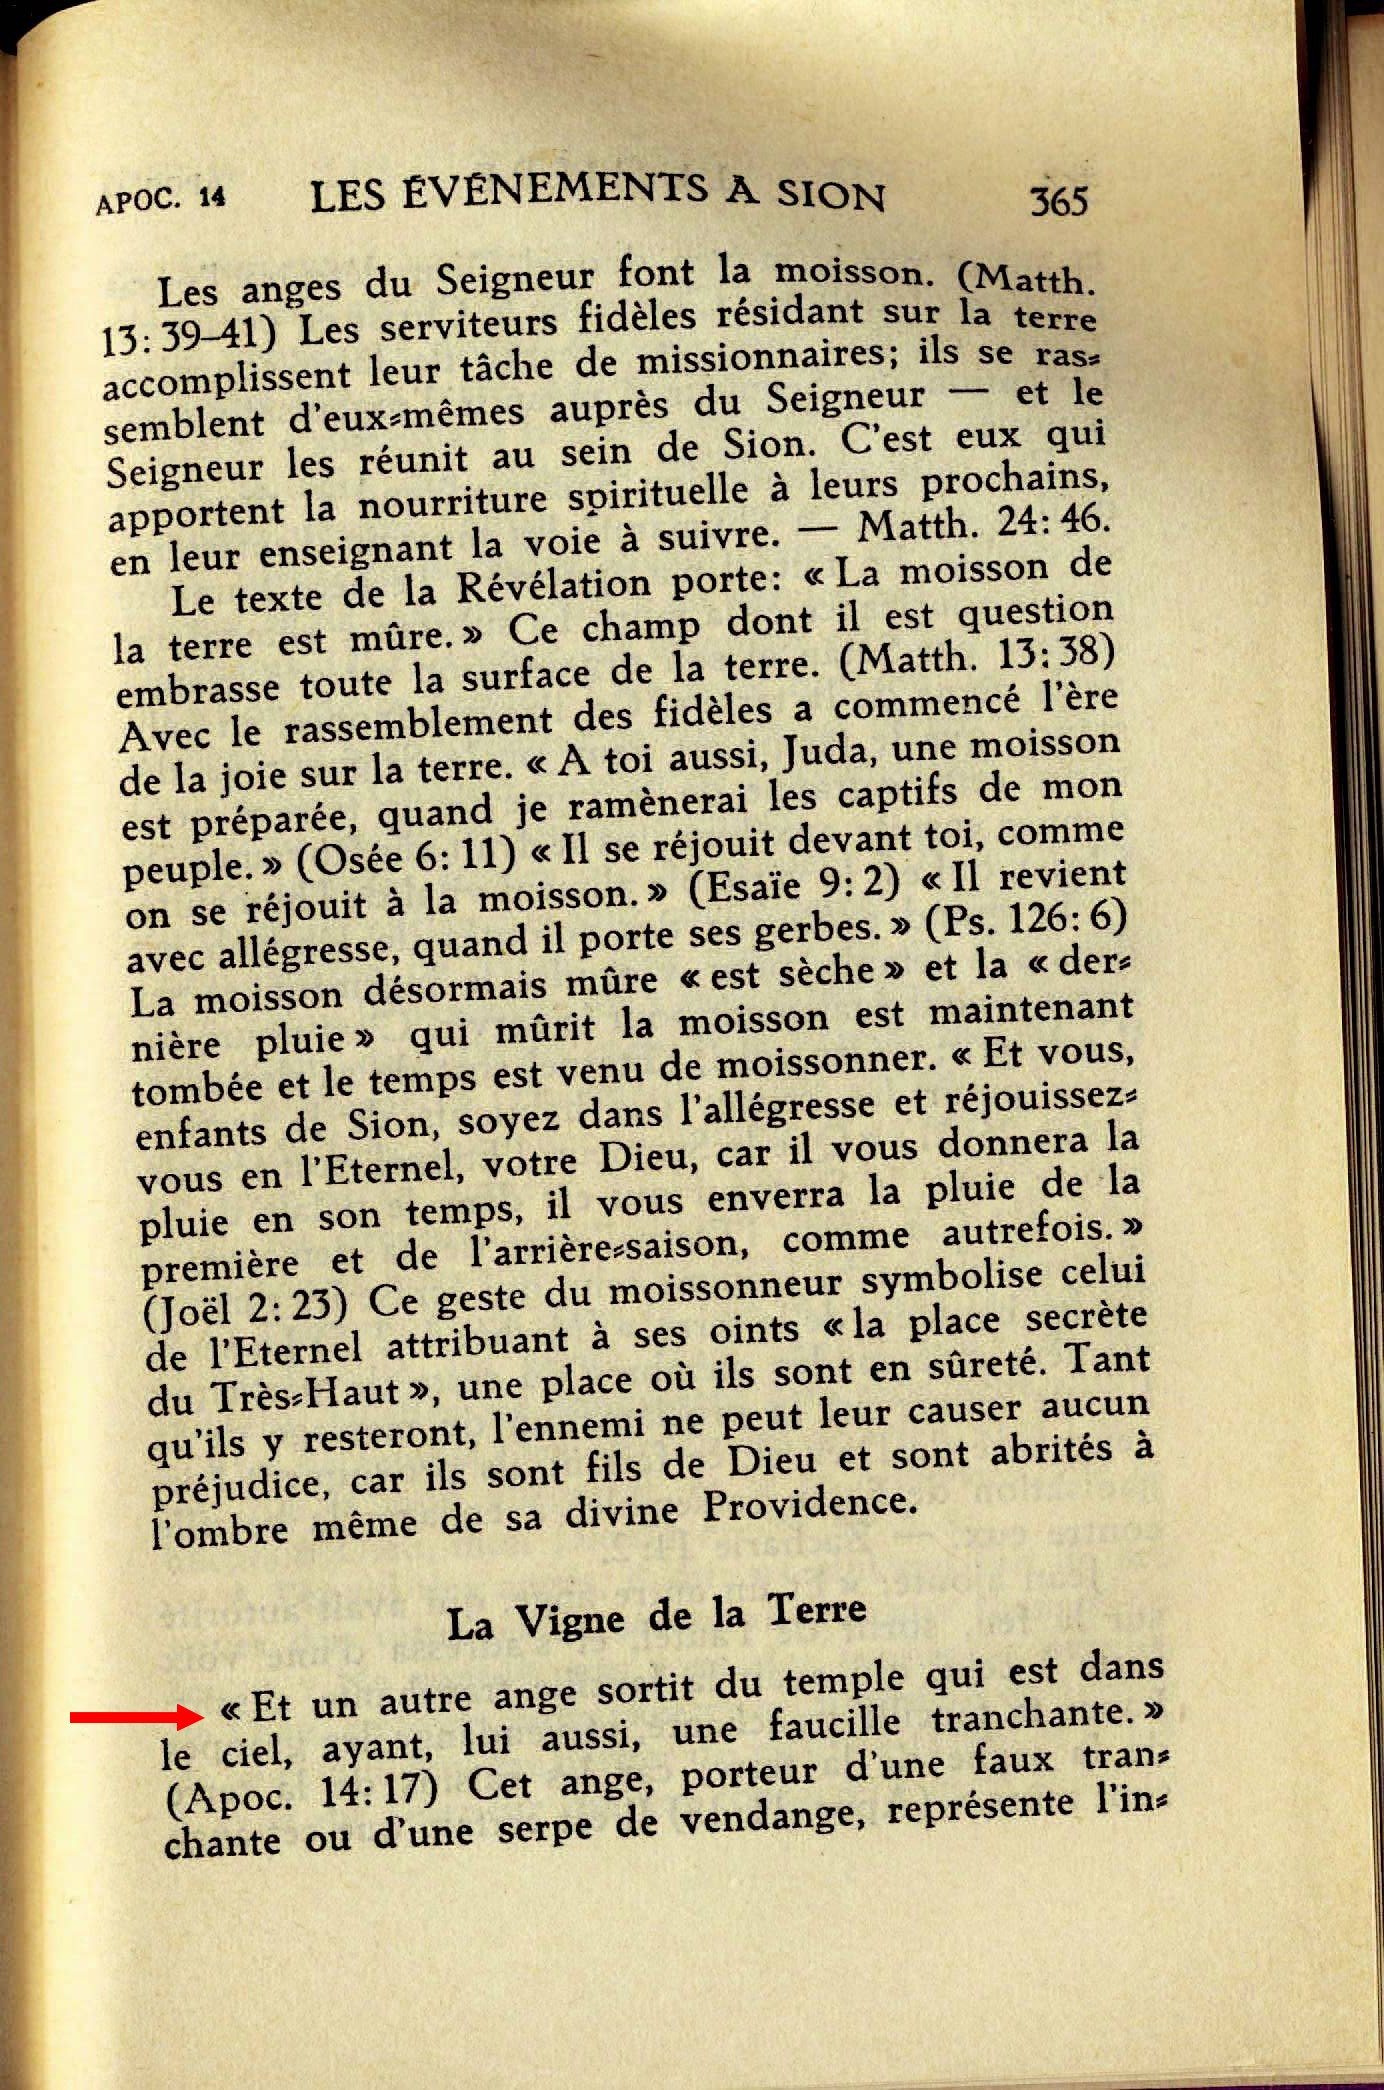 L'ange d' Apocalypse 14:17 = Charles Russell, NON, = Jésus As3y